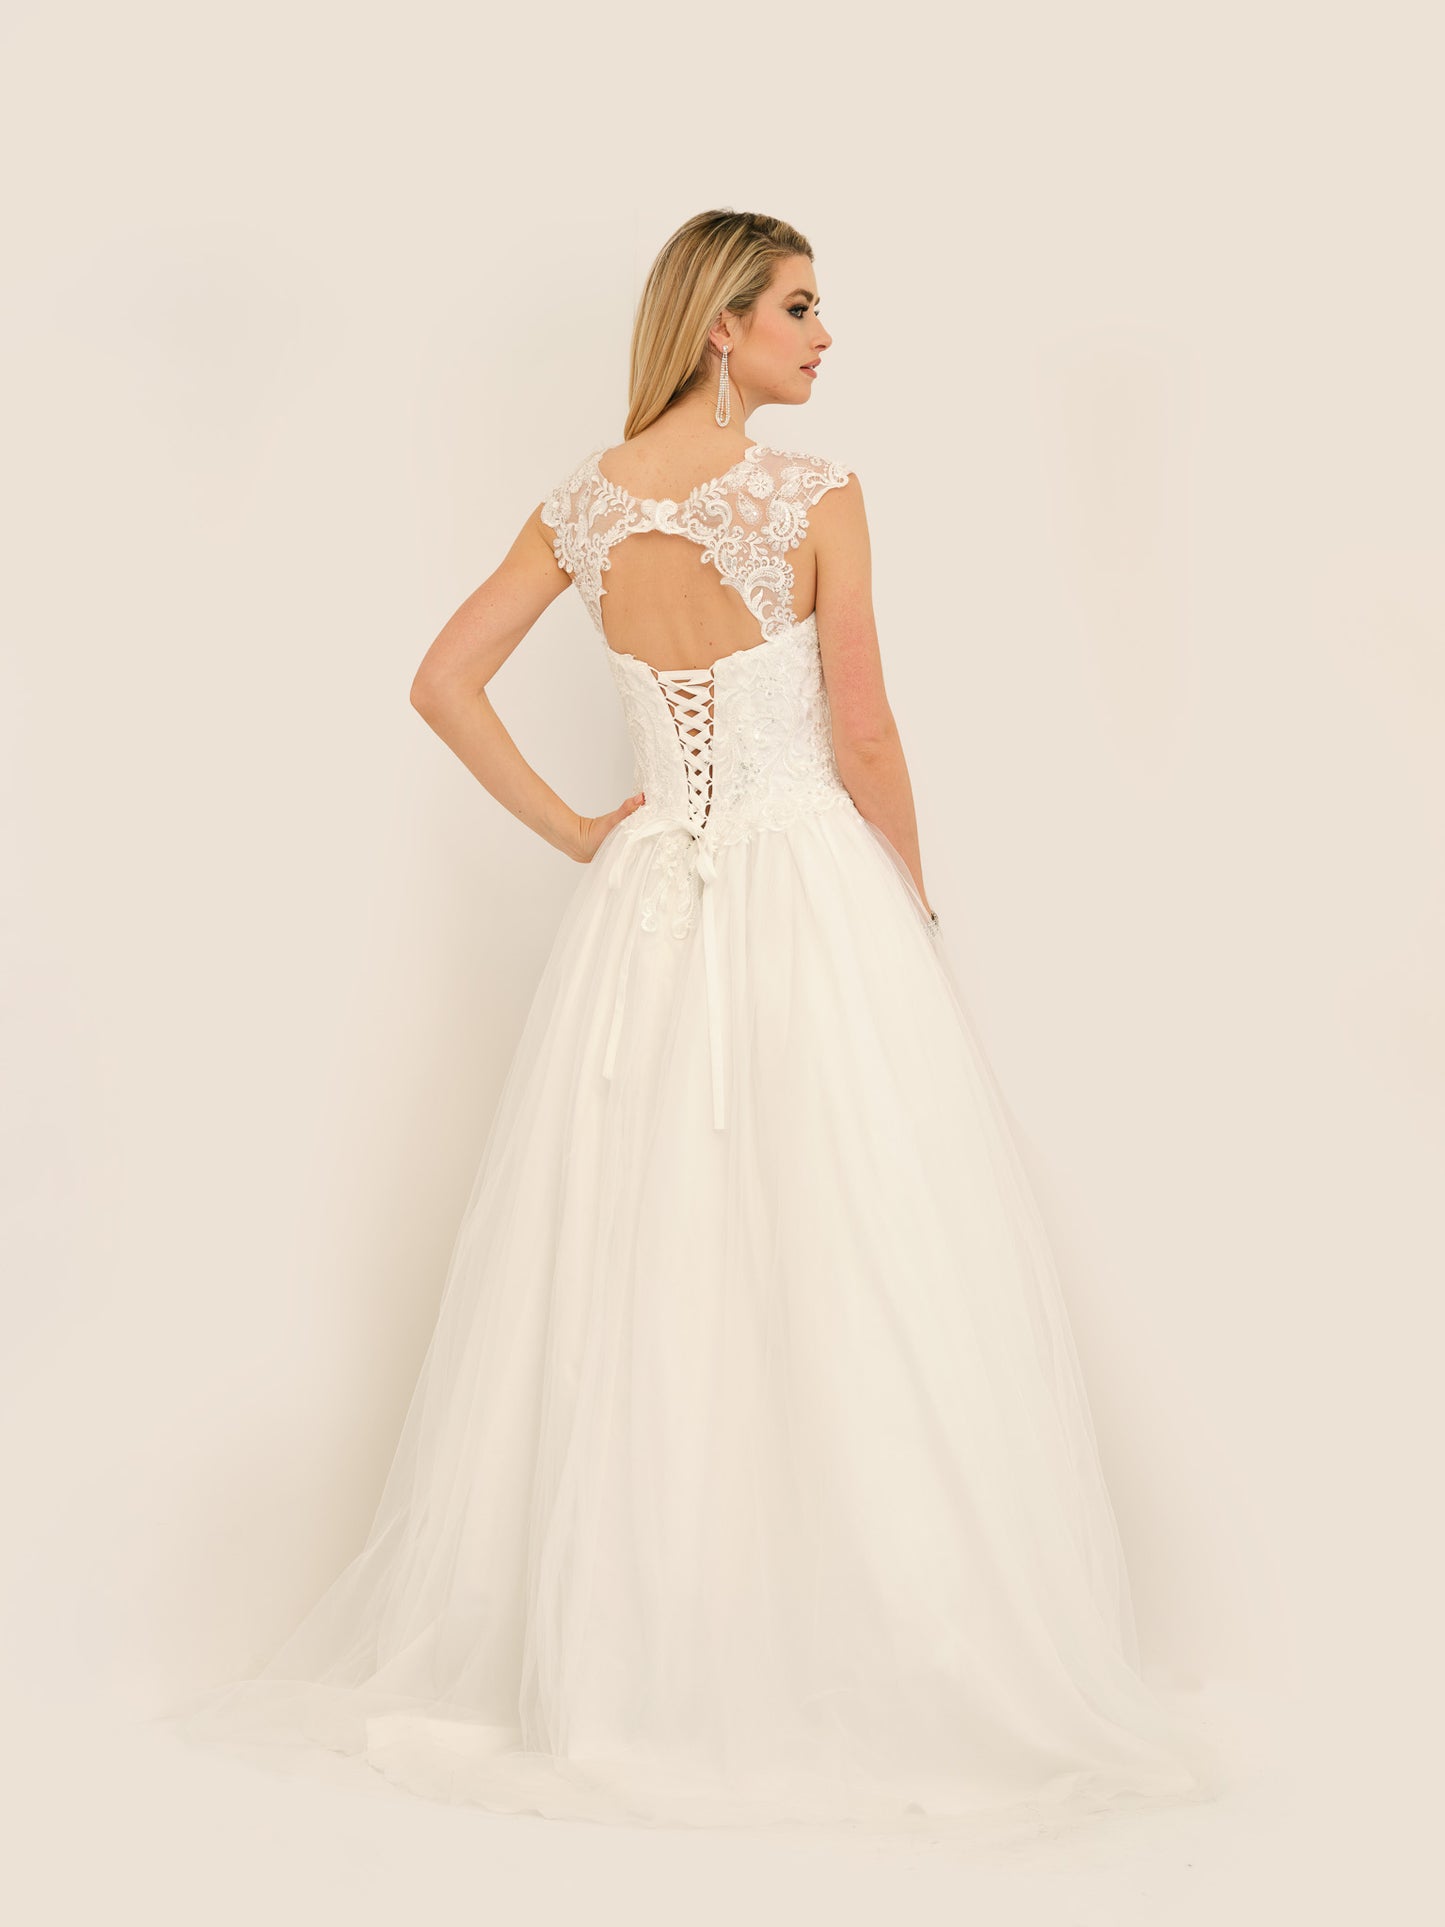 FLORAL CUT OUT LACE UP BALLGOWN WEDDING GOWN